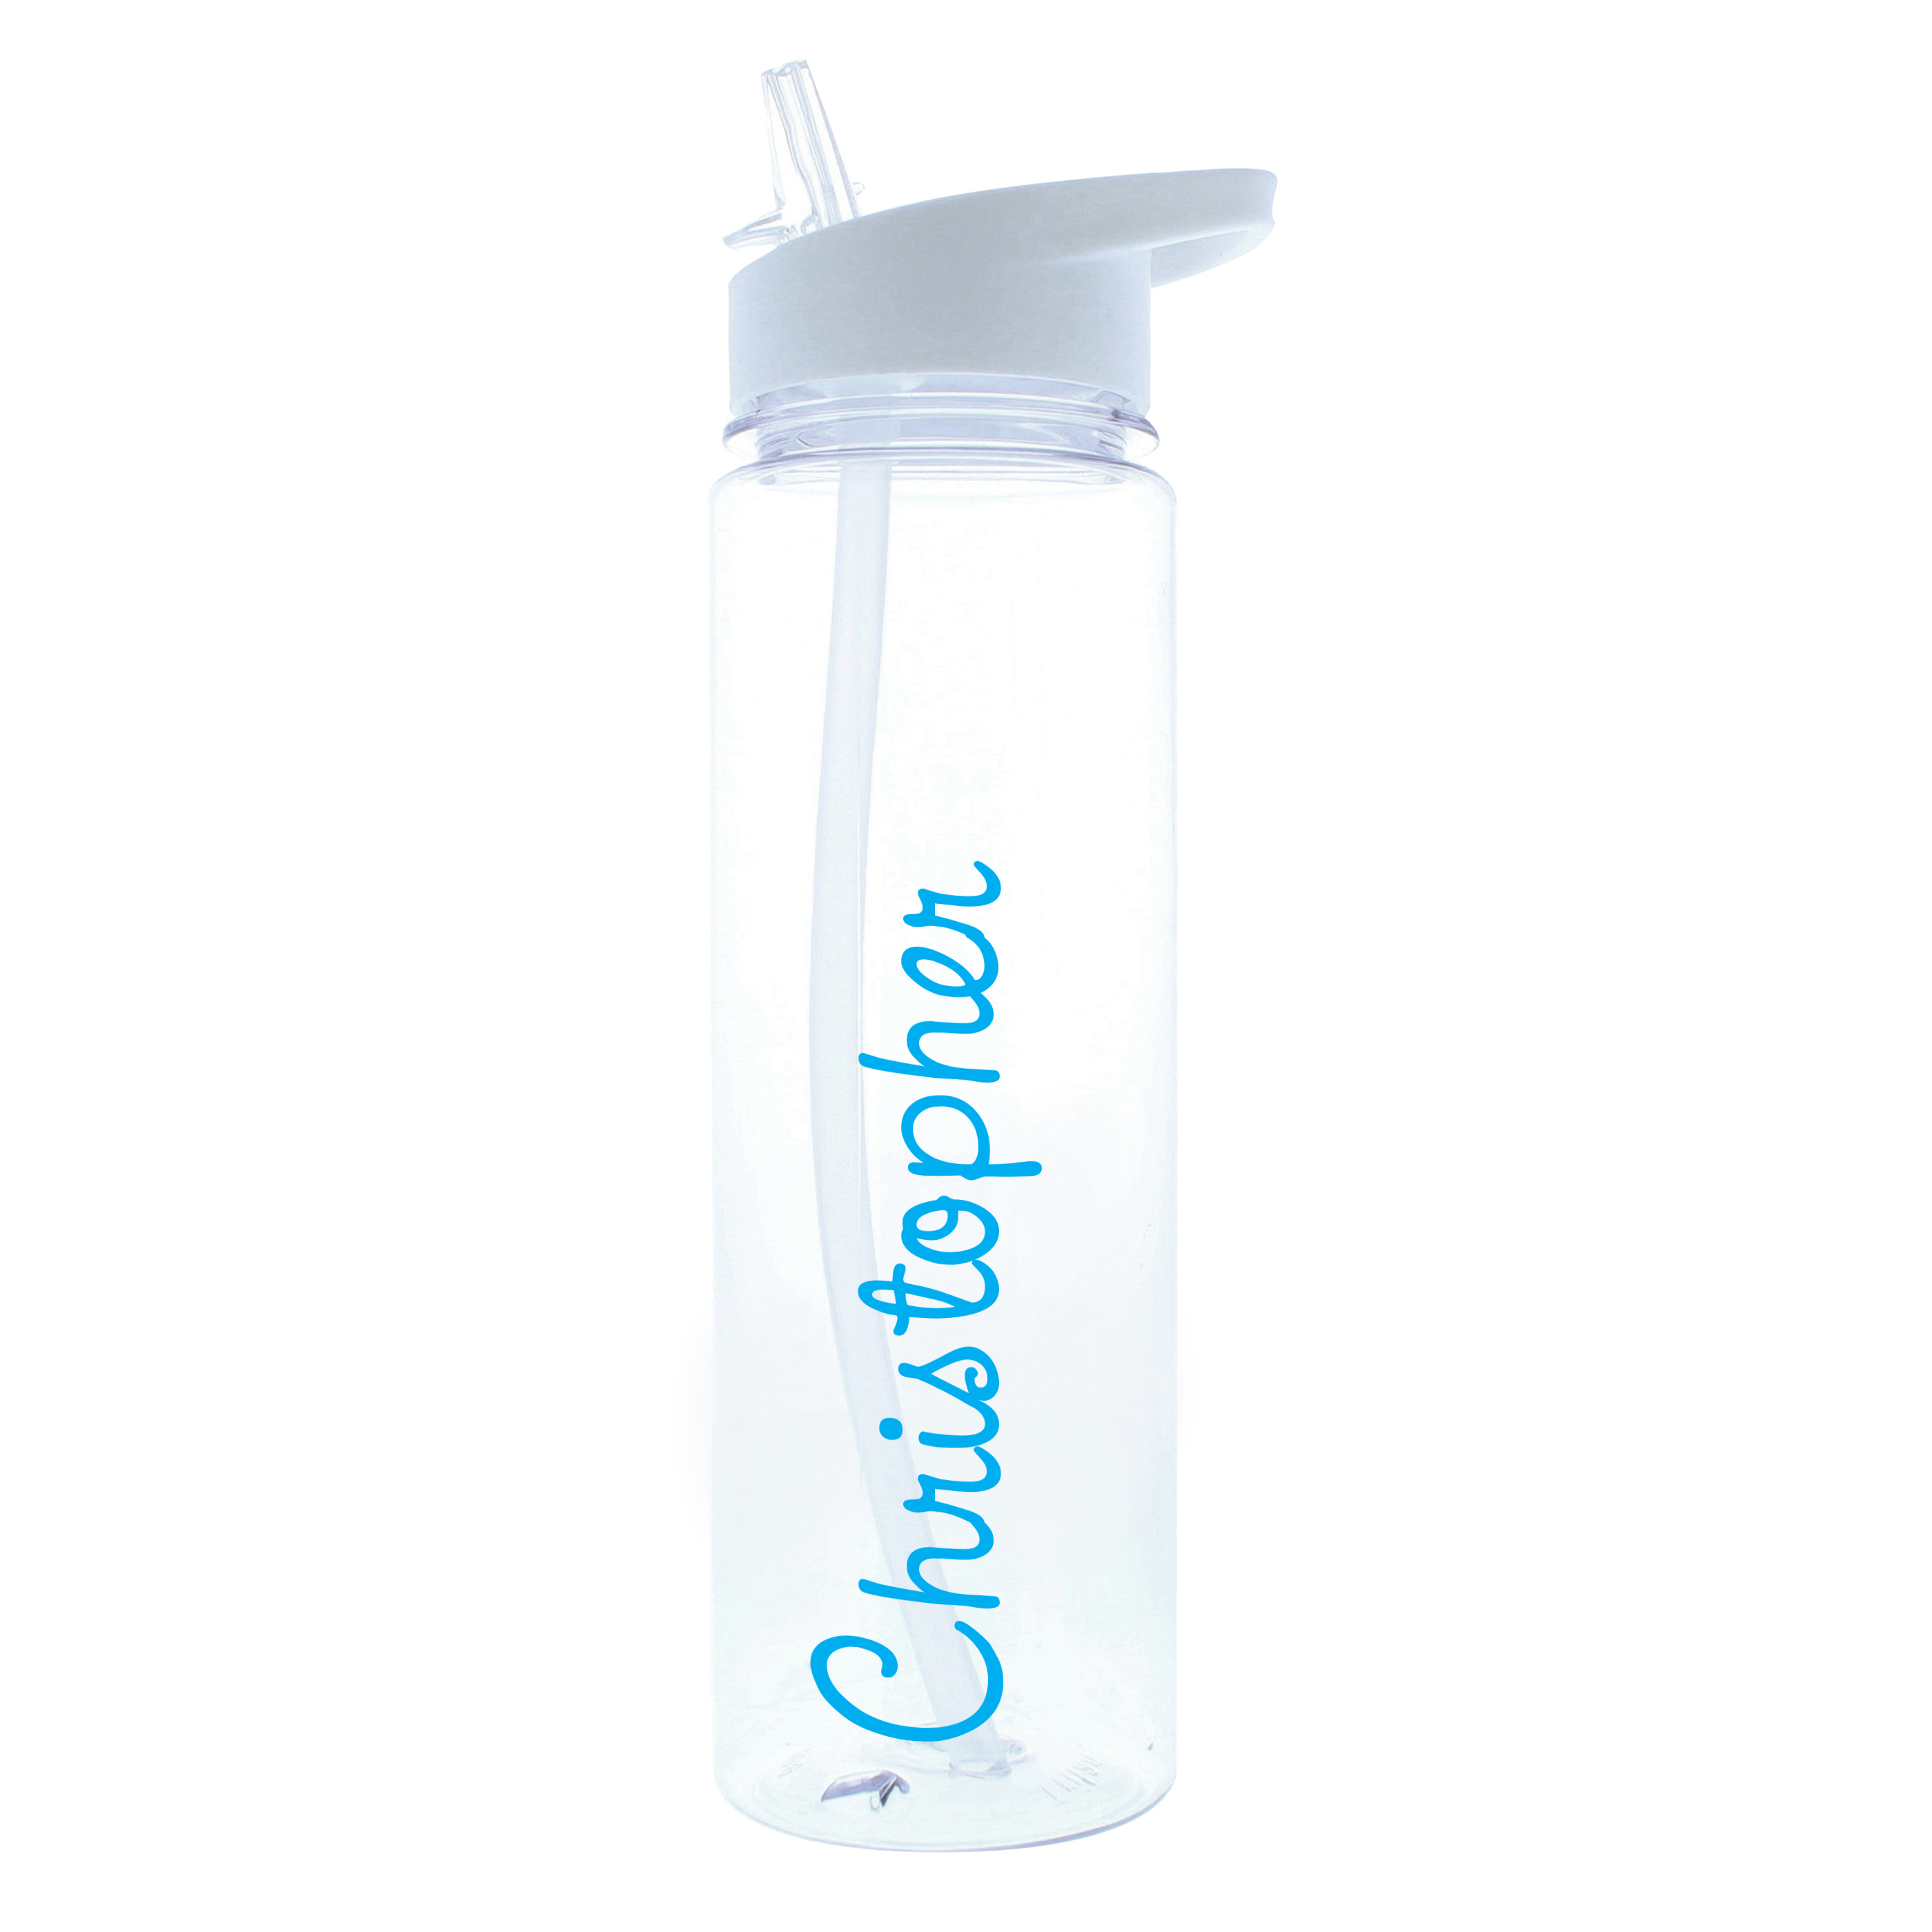 Custom dinosaur water bottle  with monogram up to 3 letters personalized Great for summer Tons of color options Great for kids